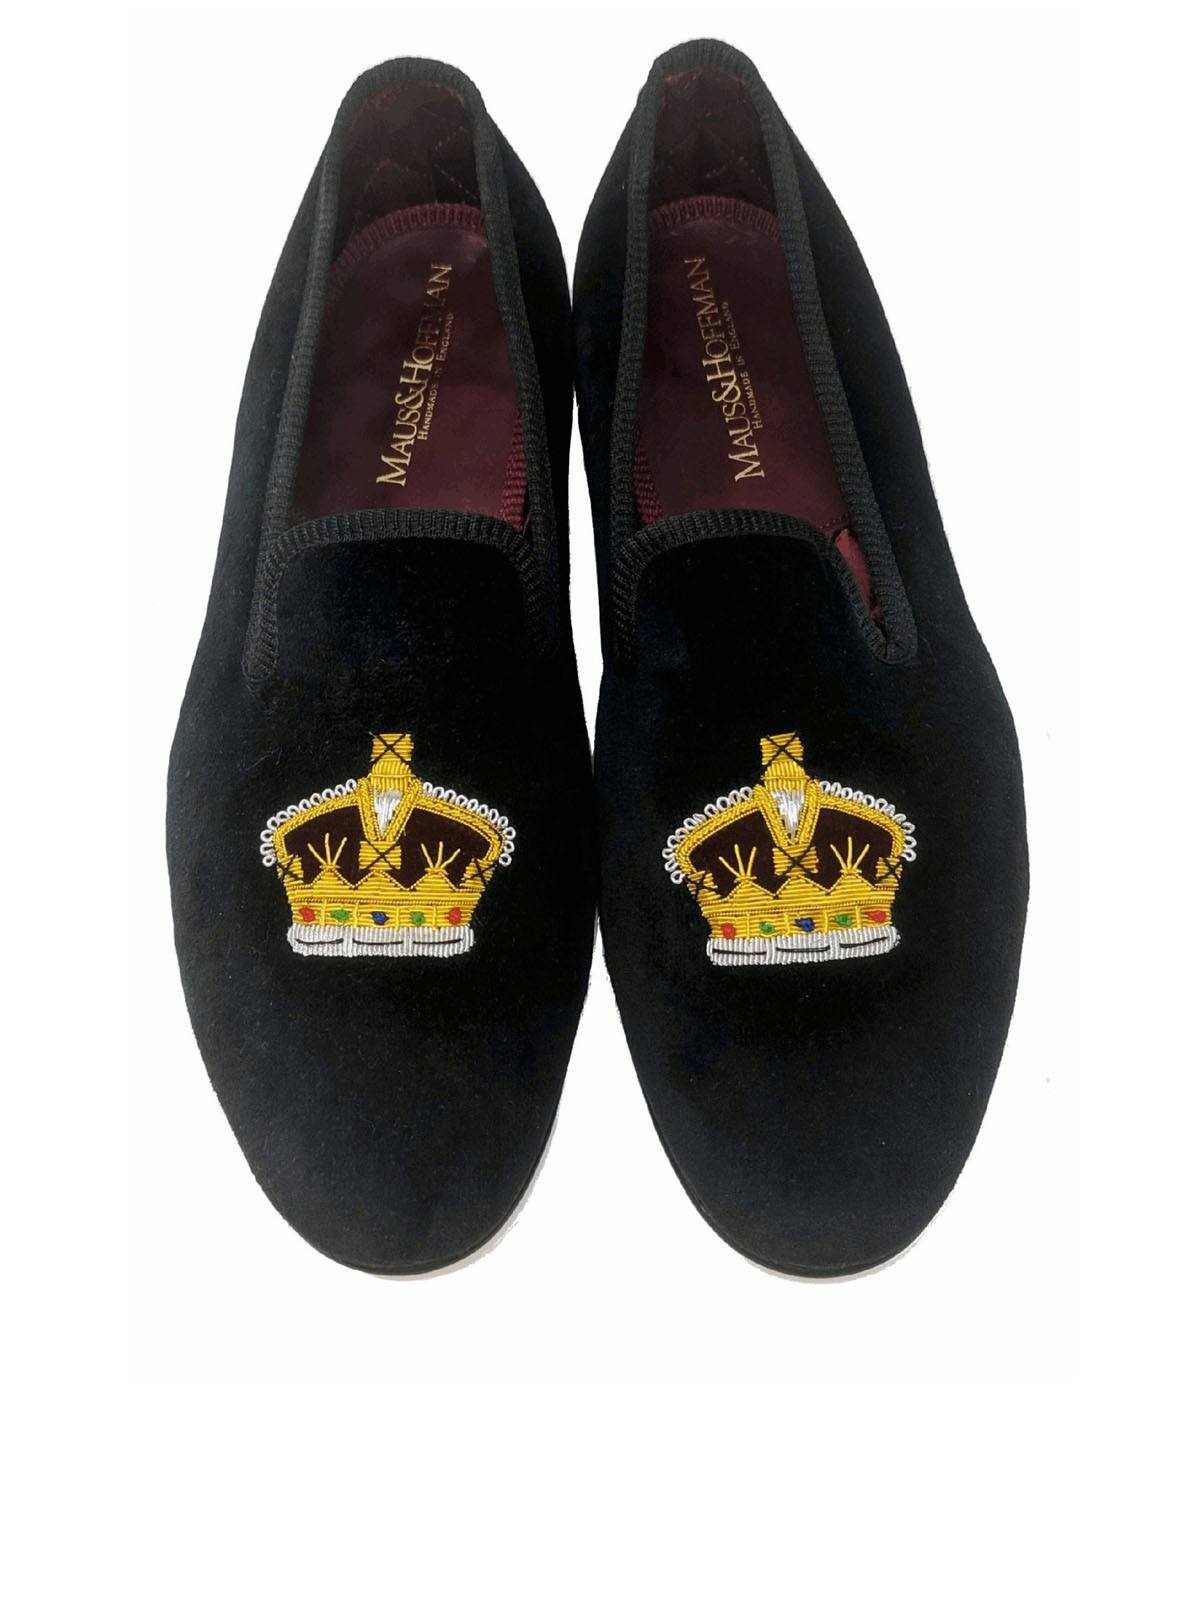 Share more than 158 crown royal slippers